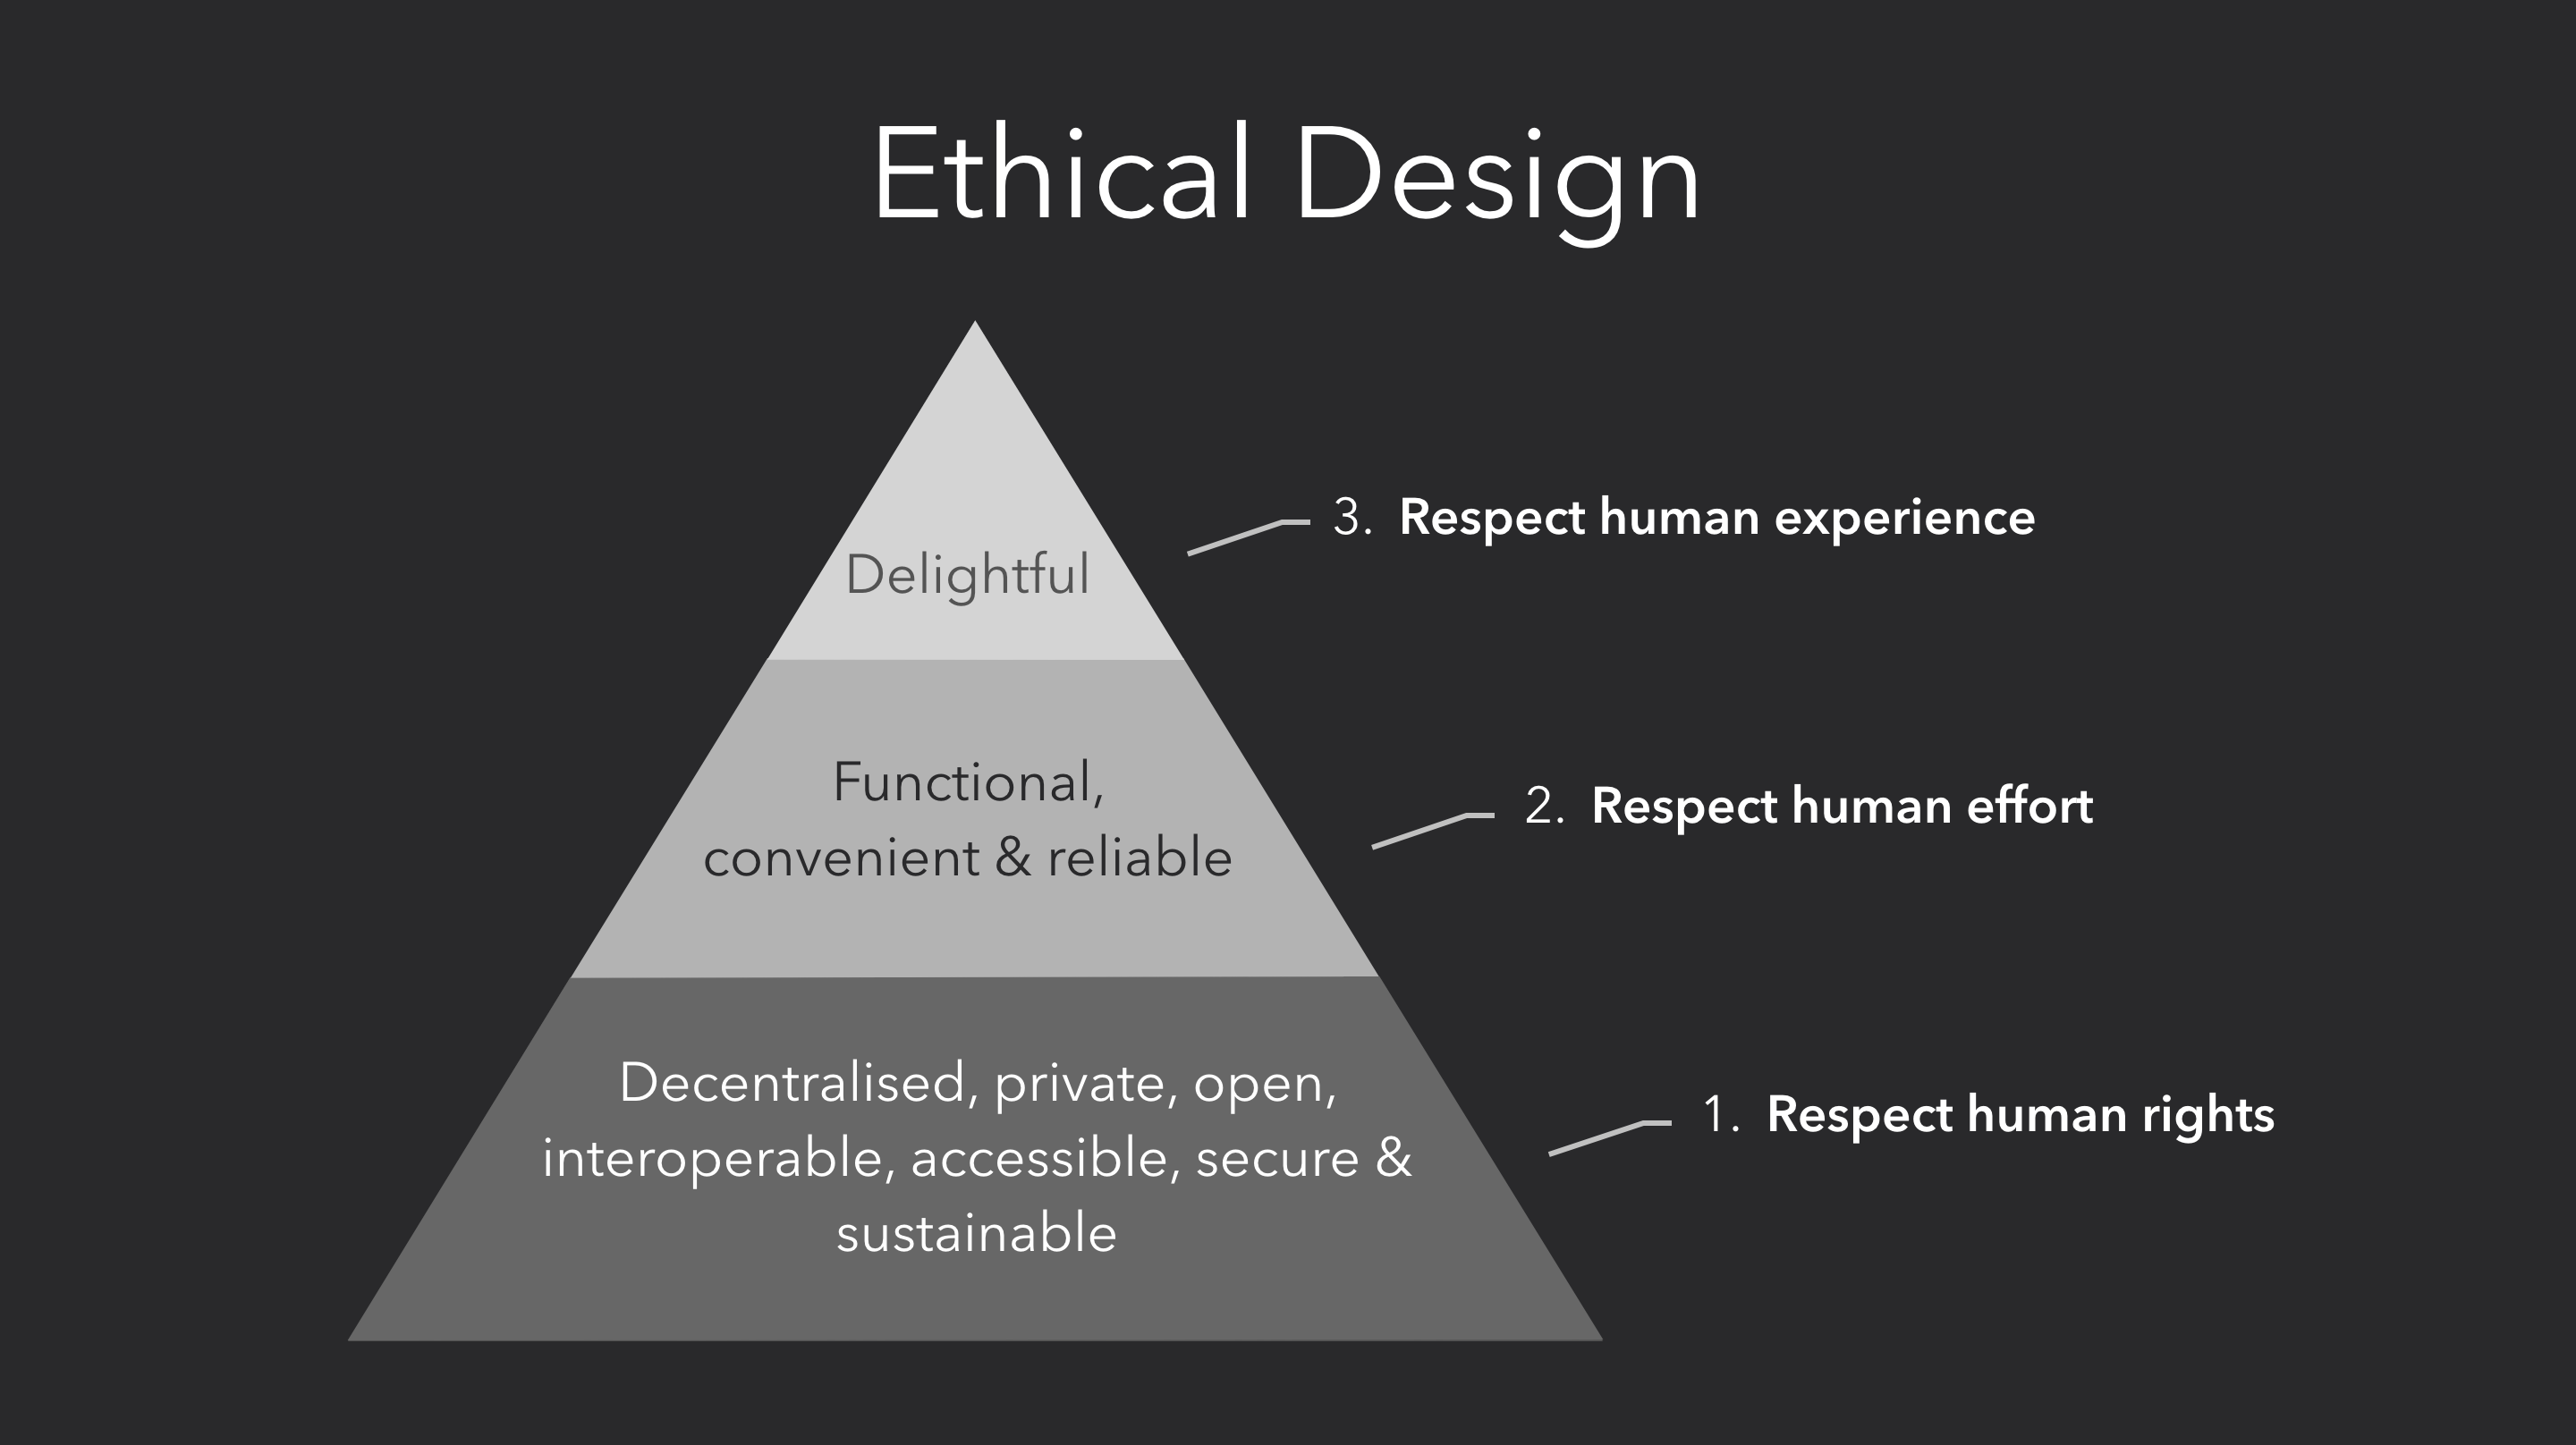 Ethical design pyramid: products should respect human rights, effort, and experience.